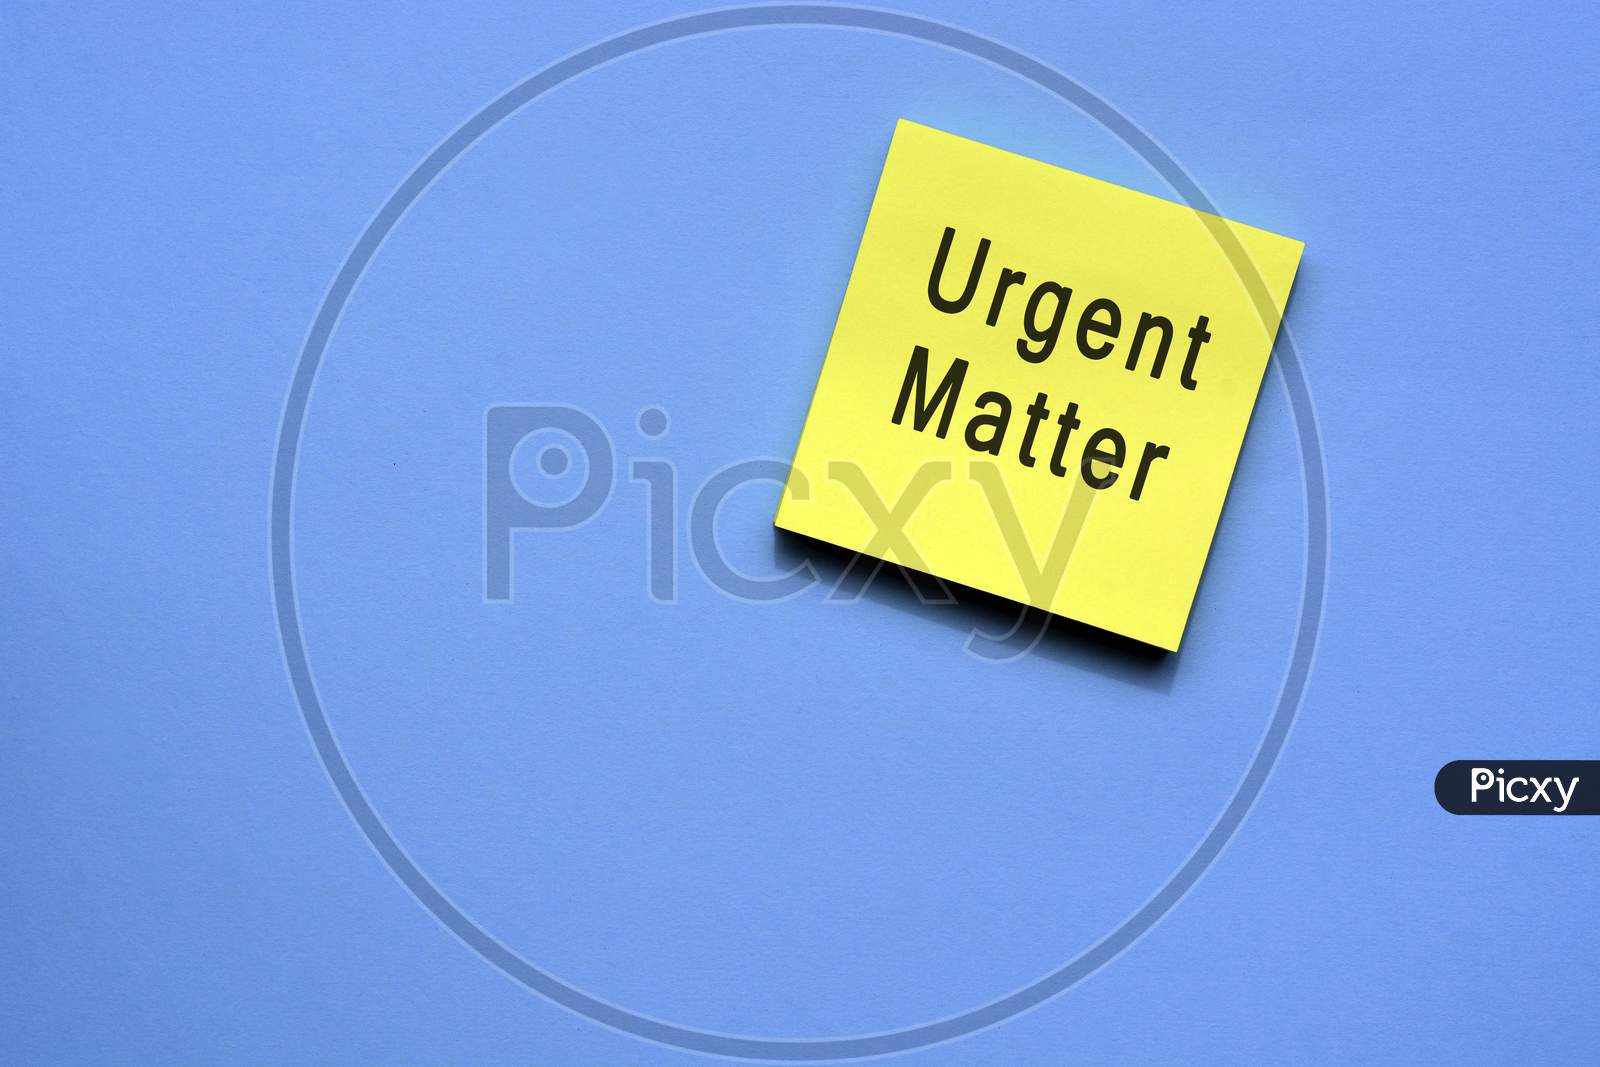 reminder text on yellow sticky note with blue background